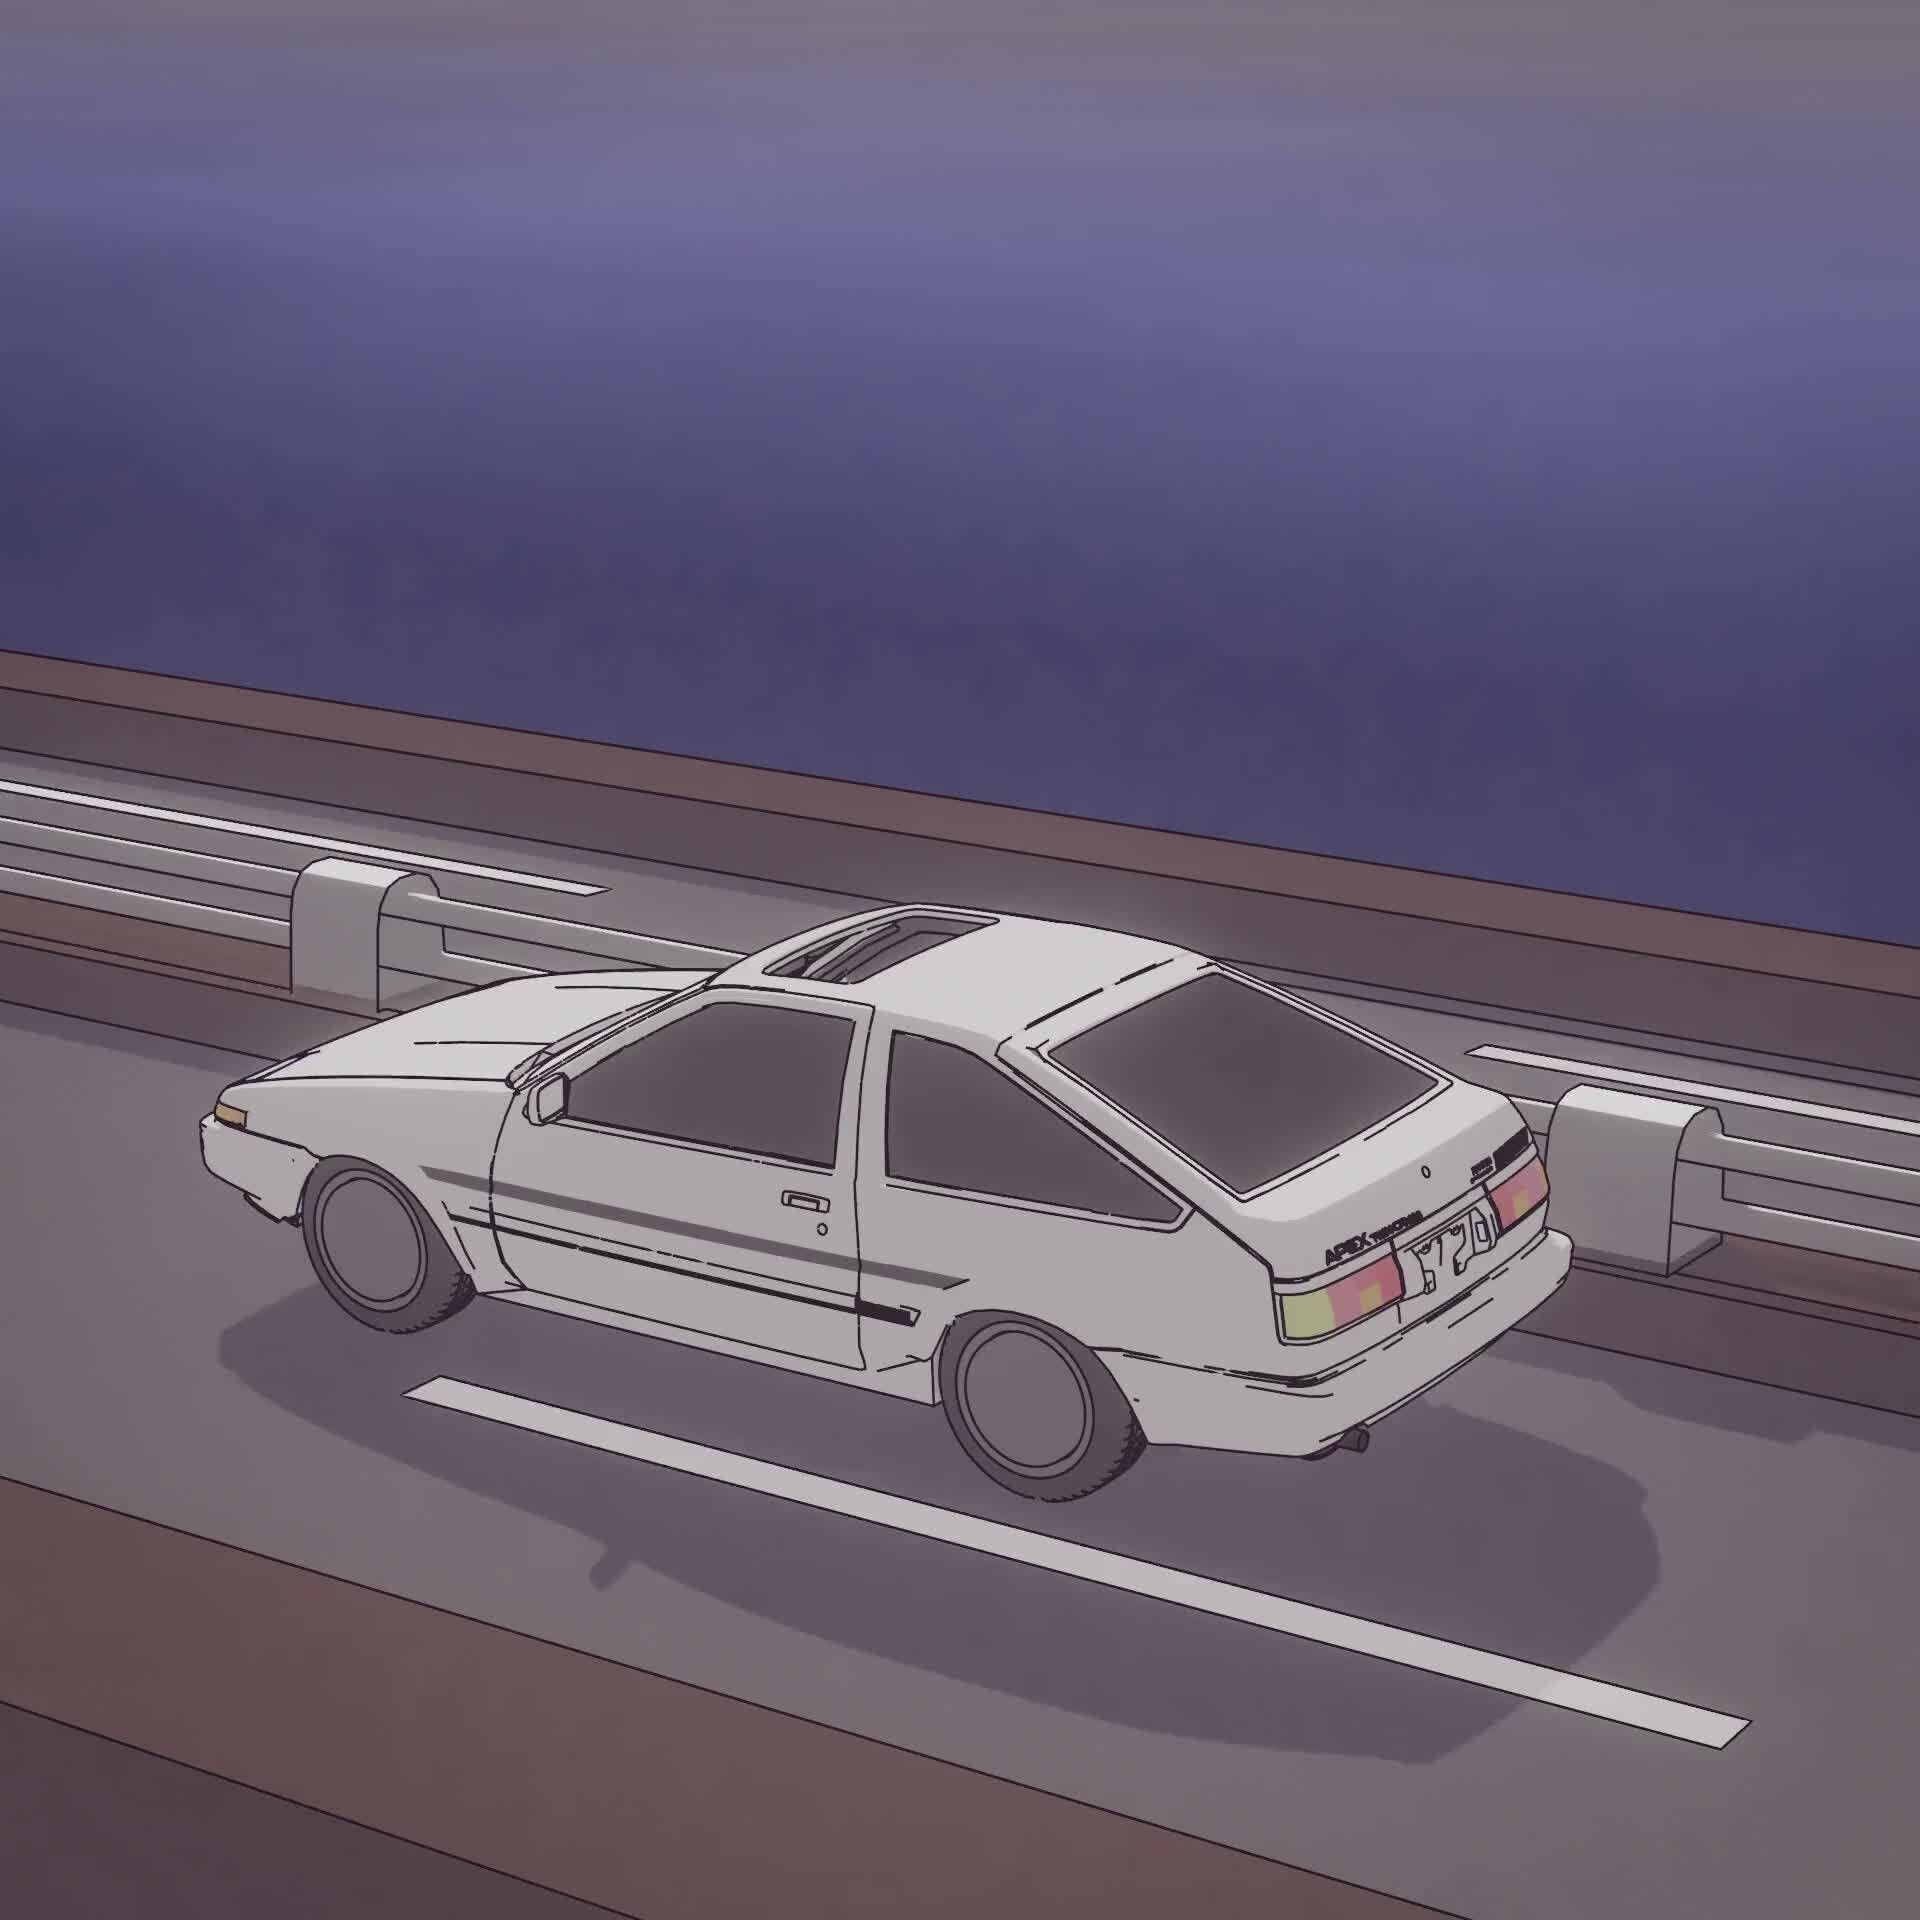 A white car driving on a road with a body of water in the background - Toyota AE86